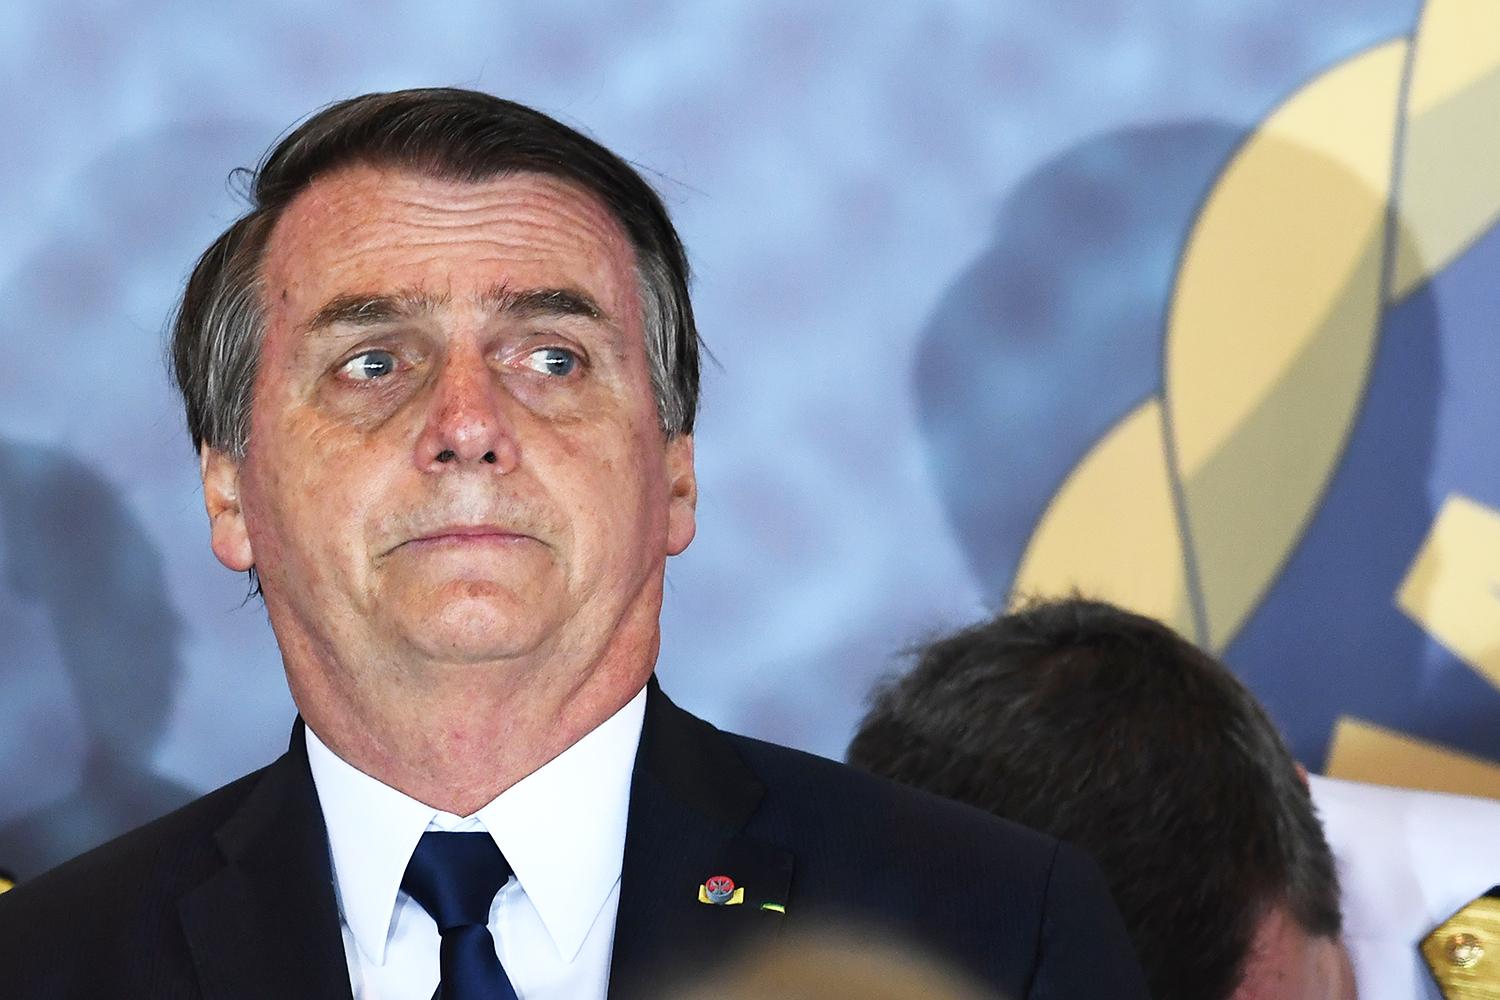 Halfway through an inflammatory speech during an event at the Planalto Palace, President Jair Bolsonaro indirectly referred to the U.S. President-elect Joe Biden, albeit not mentioning him by name, and said that diplomacy is not enough to "cope with all this".